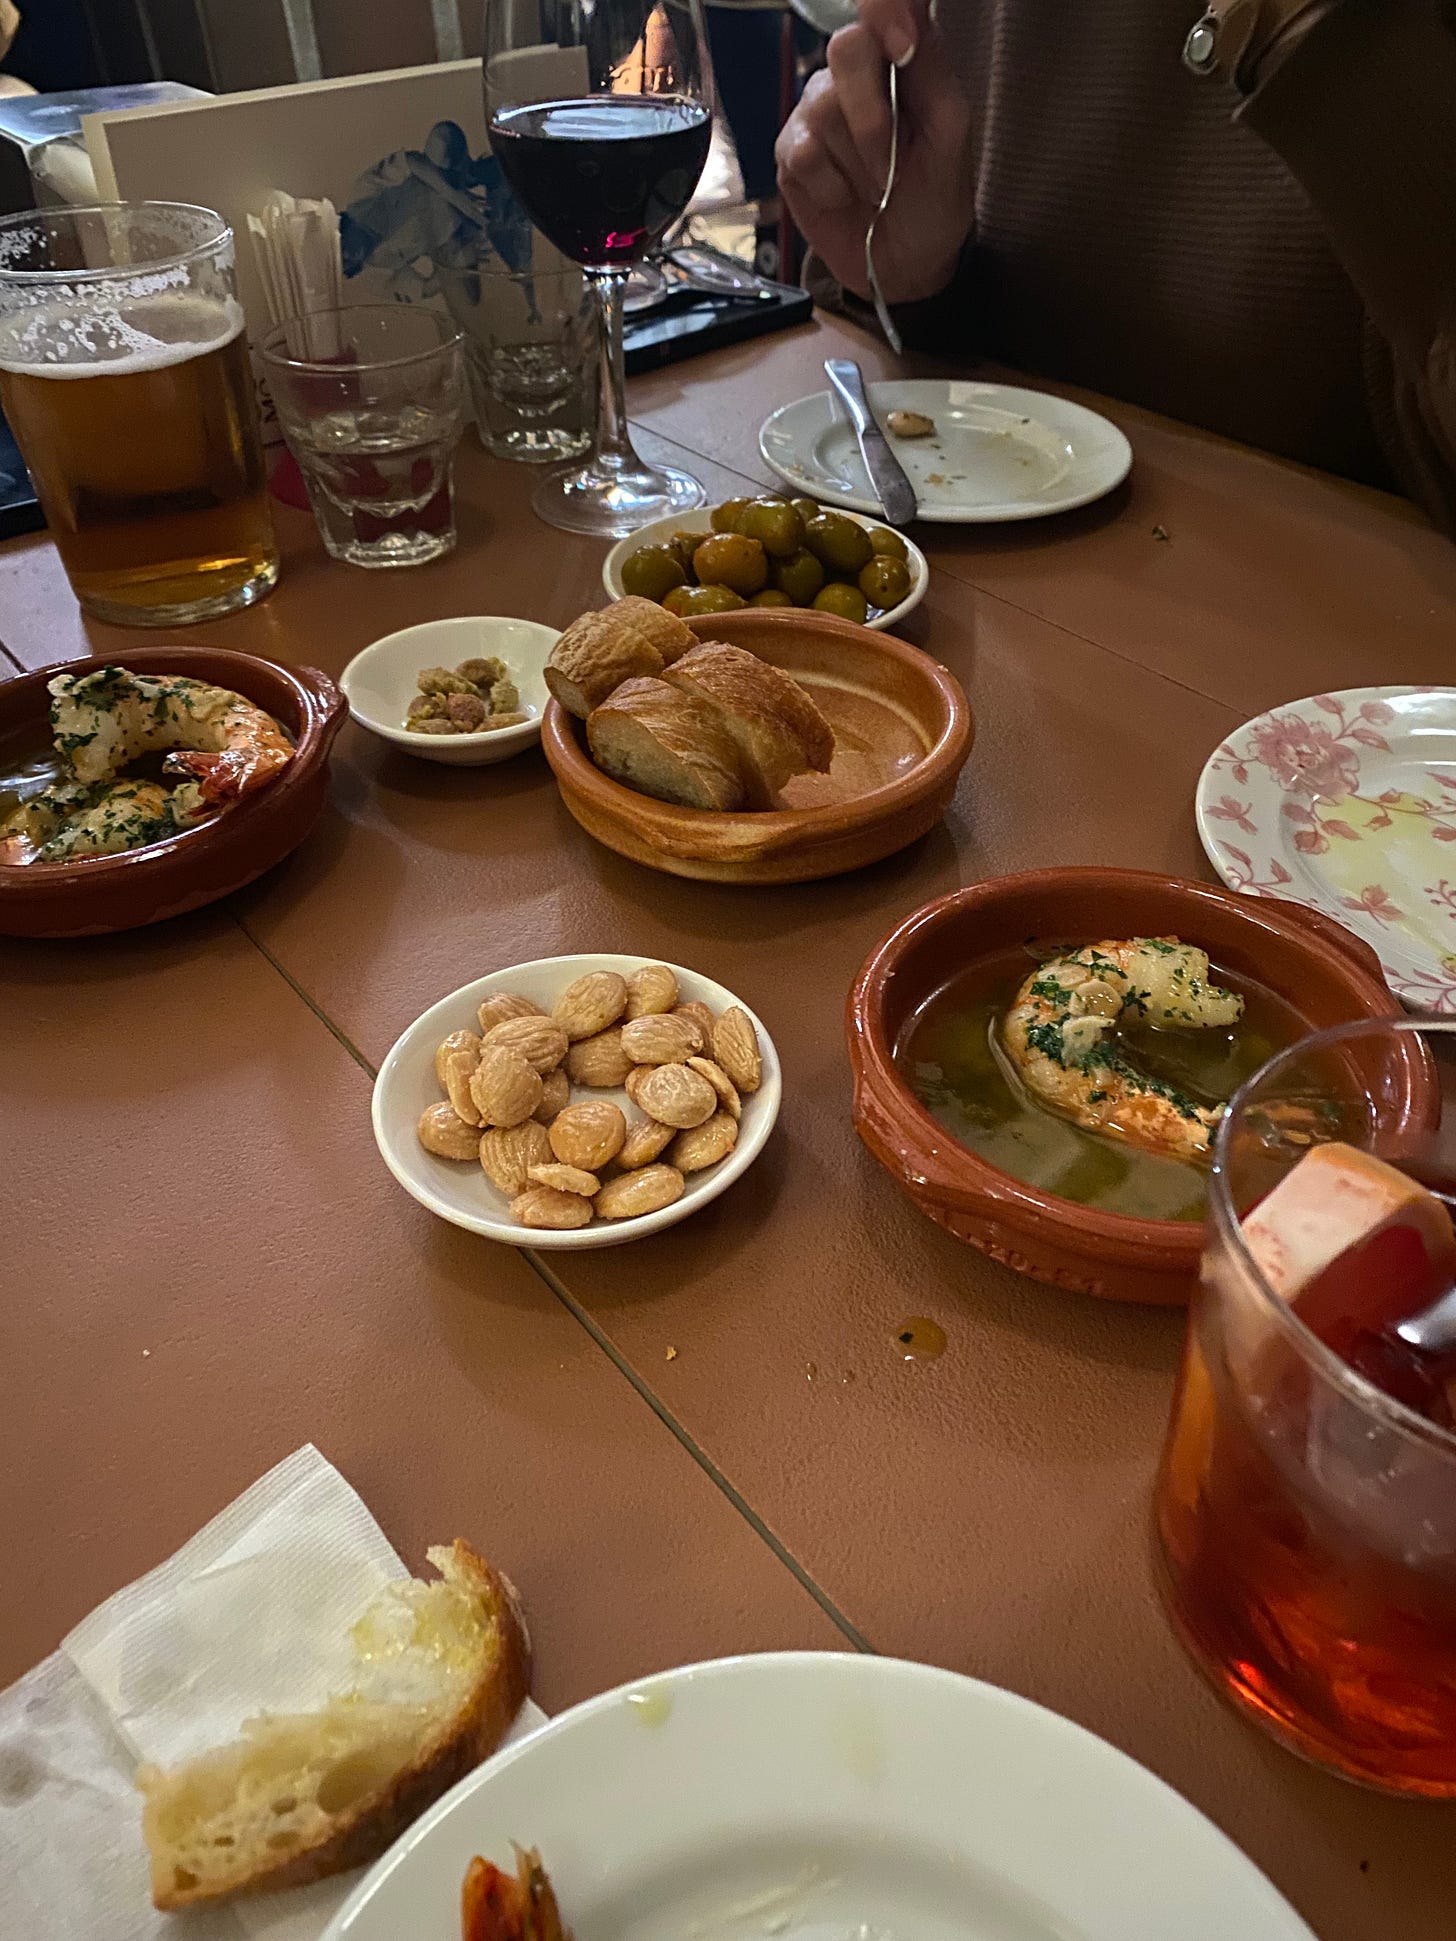 a restaurant table with a scattering of small dishes and plates, partially eaten. A cocktail peeks out of the lower right corner next to a plate and a crust of bread; in the centre are a dish of marcona almonds and two dishes of prawns in garlic sauce, a dish with two slices of baguette, and behind it, a white bowl of marinated olives next to a ramekin of their pits.